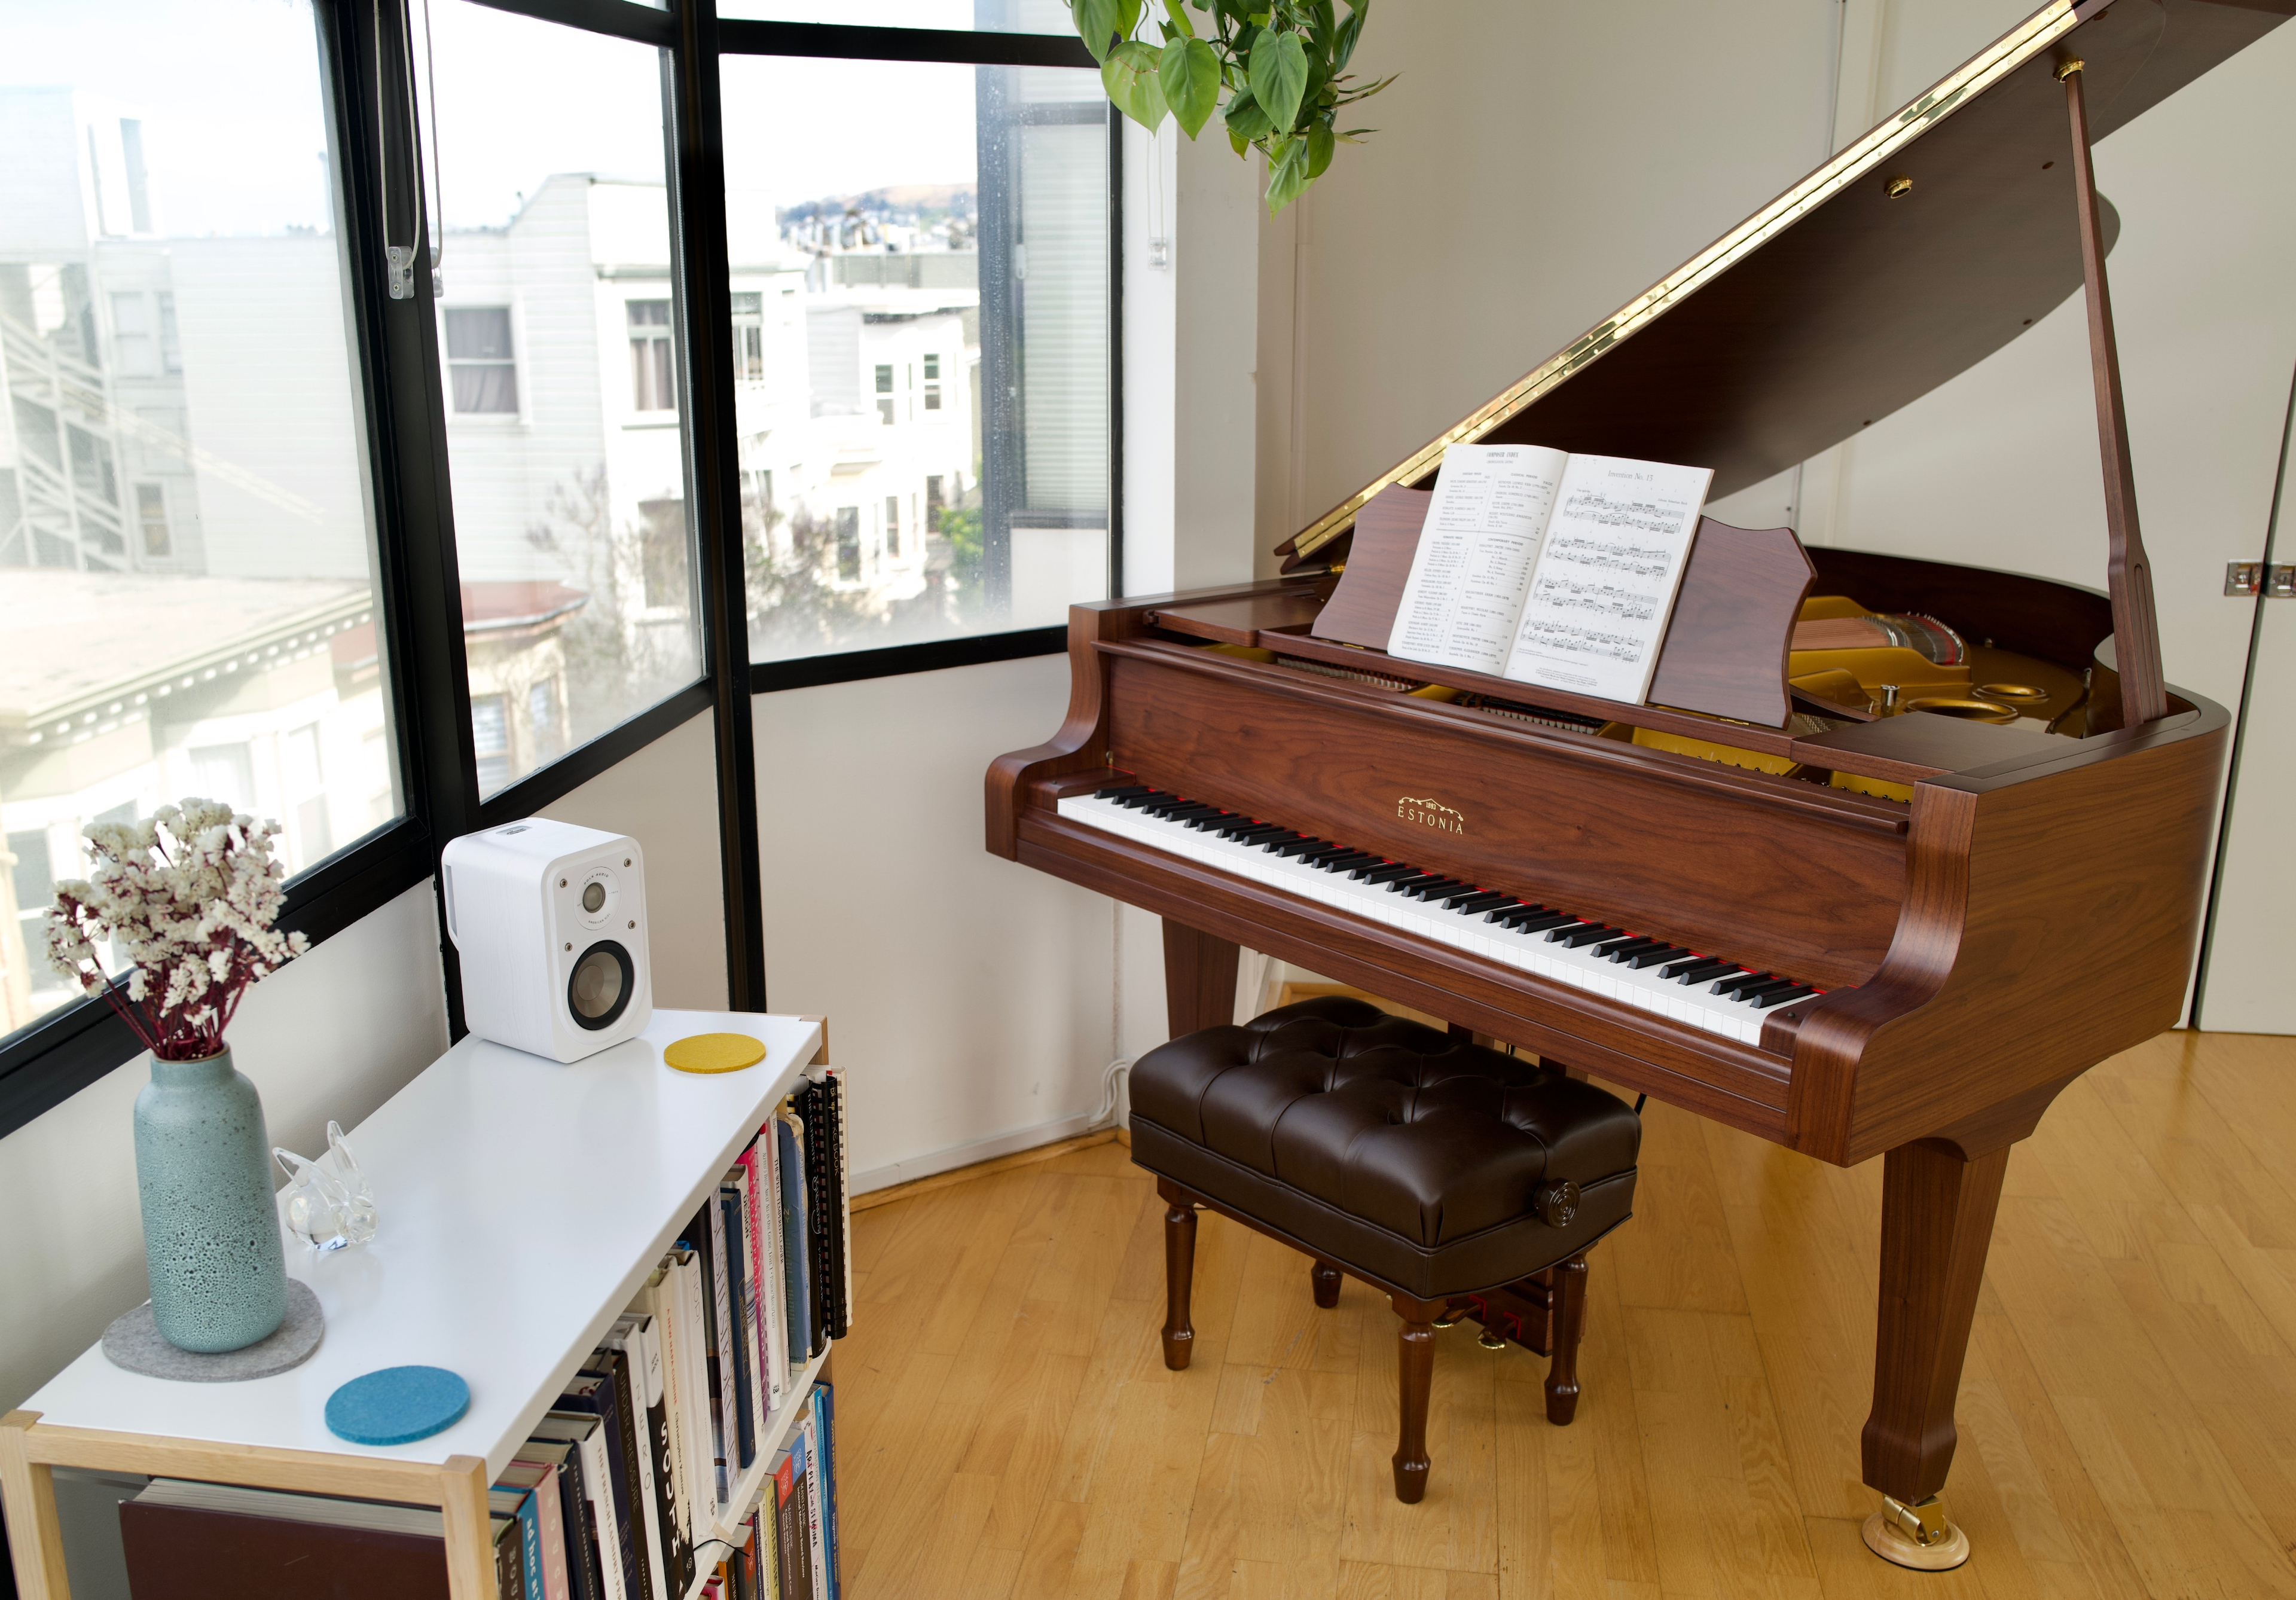 Andy's baby grand piano. Image from Andy Matuschak.